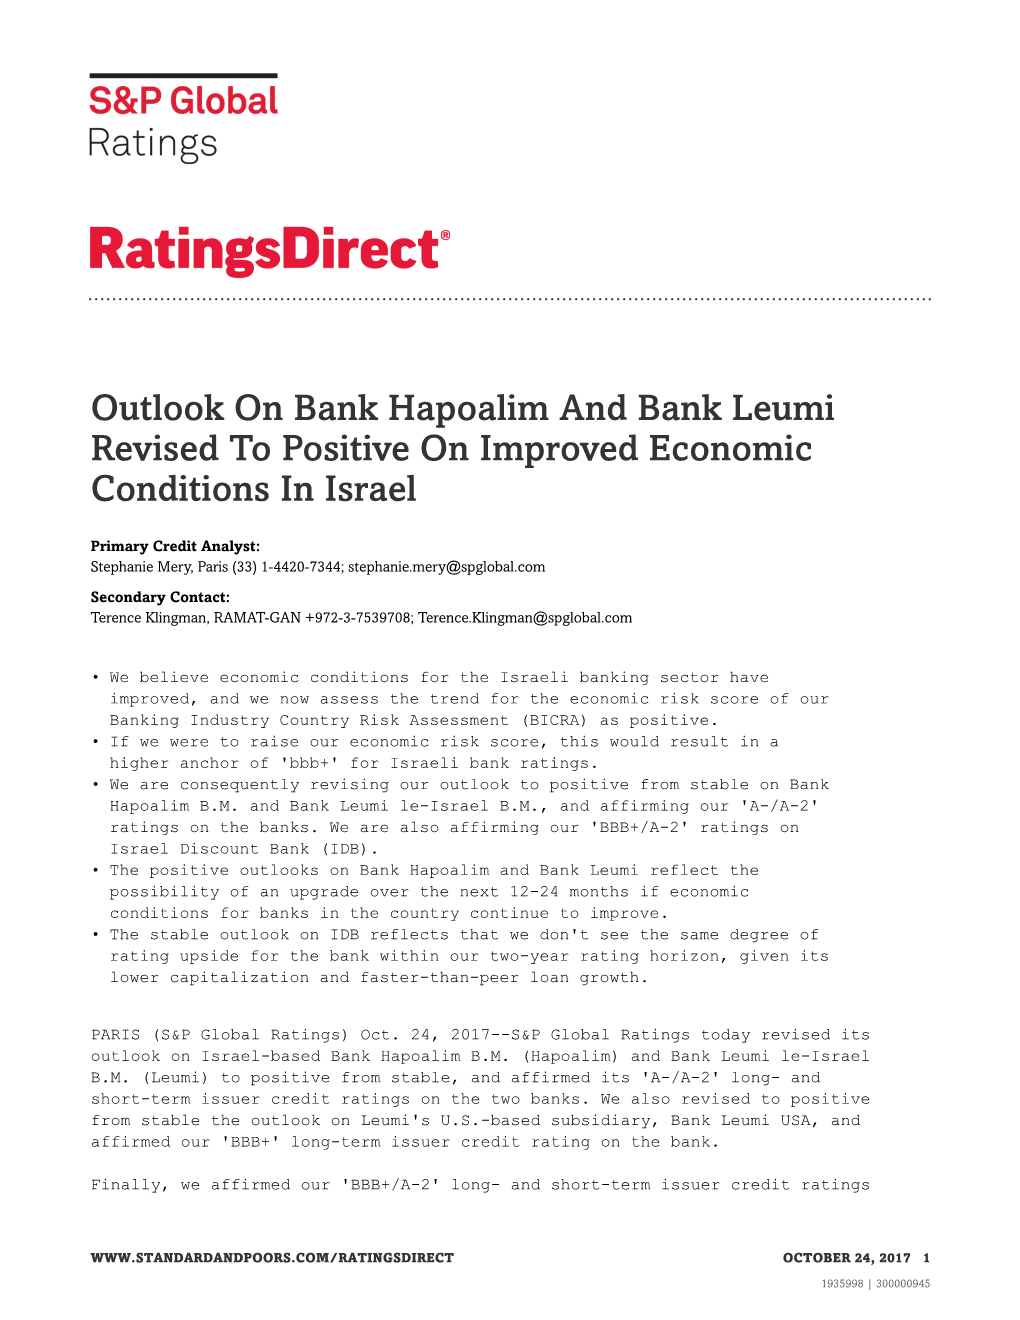 Outlook on Bank Hapoalim and Bank Leumi Revised to Positive on Improved Economic Conditions in Israel